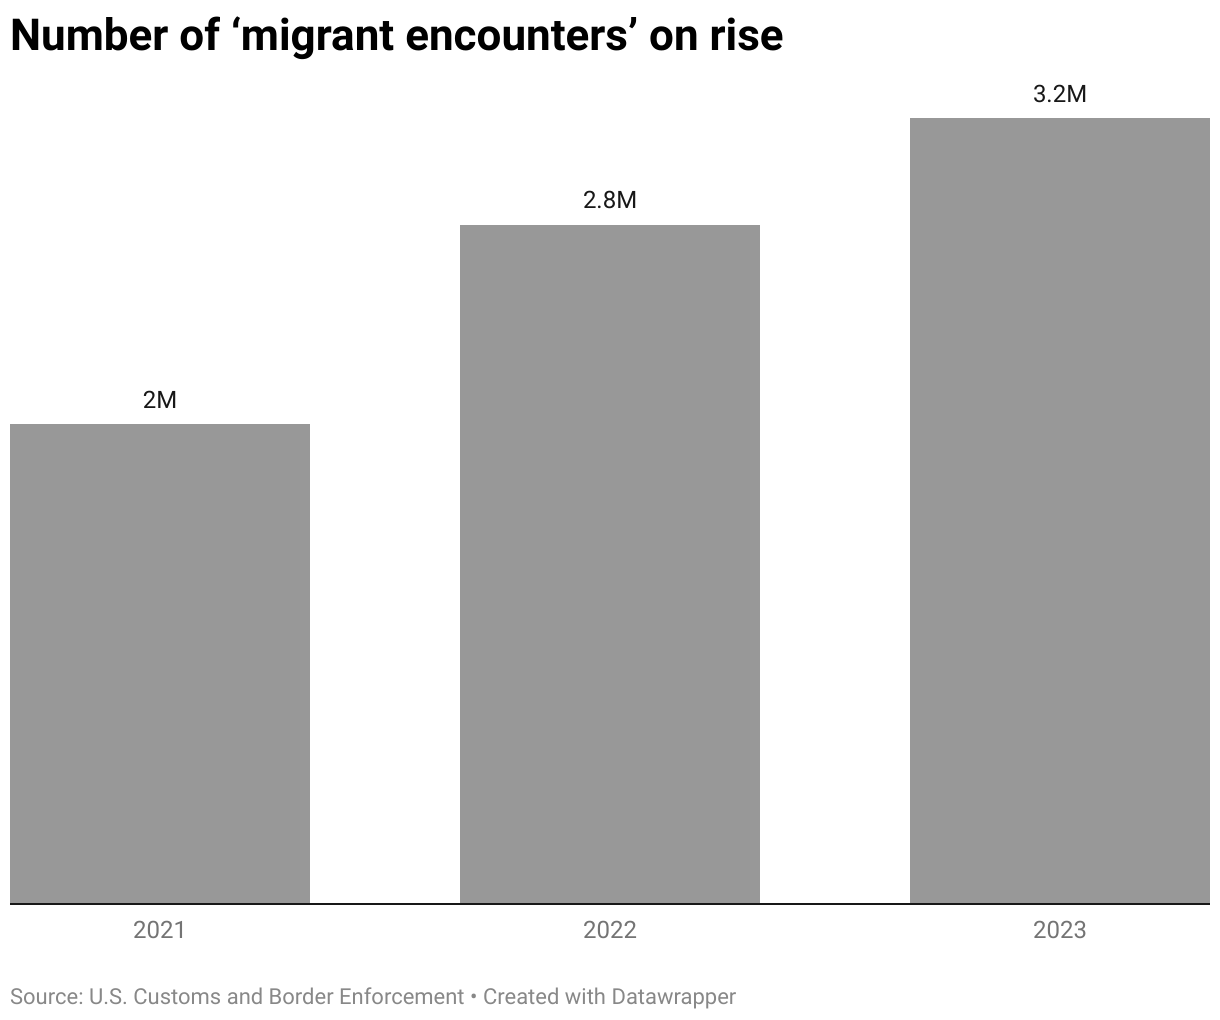 Number of migrants attempting to enter U.S. climbed from nearly 2 million in 2021 to 2.8 million in 2022, to 3.2 million in 2023.